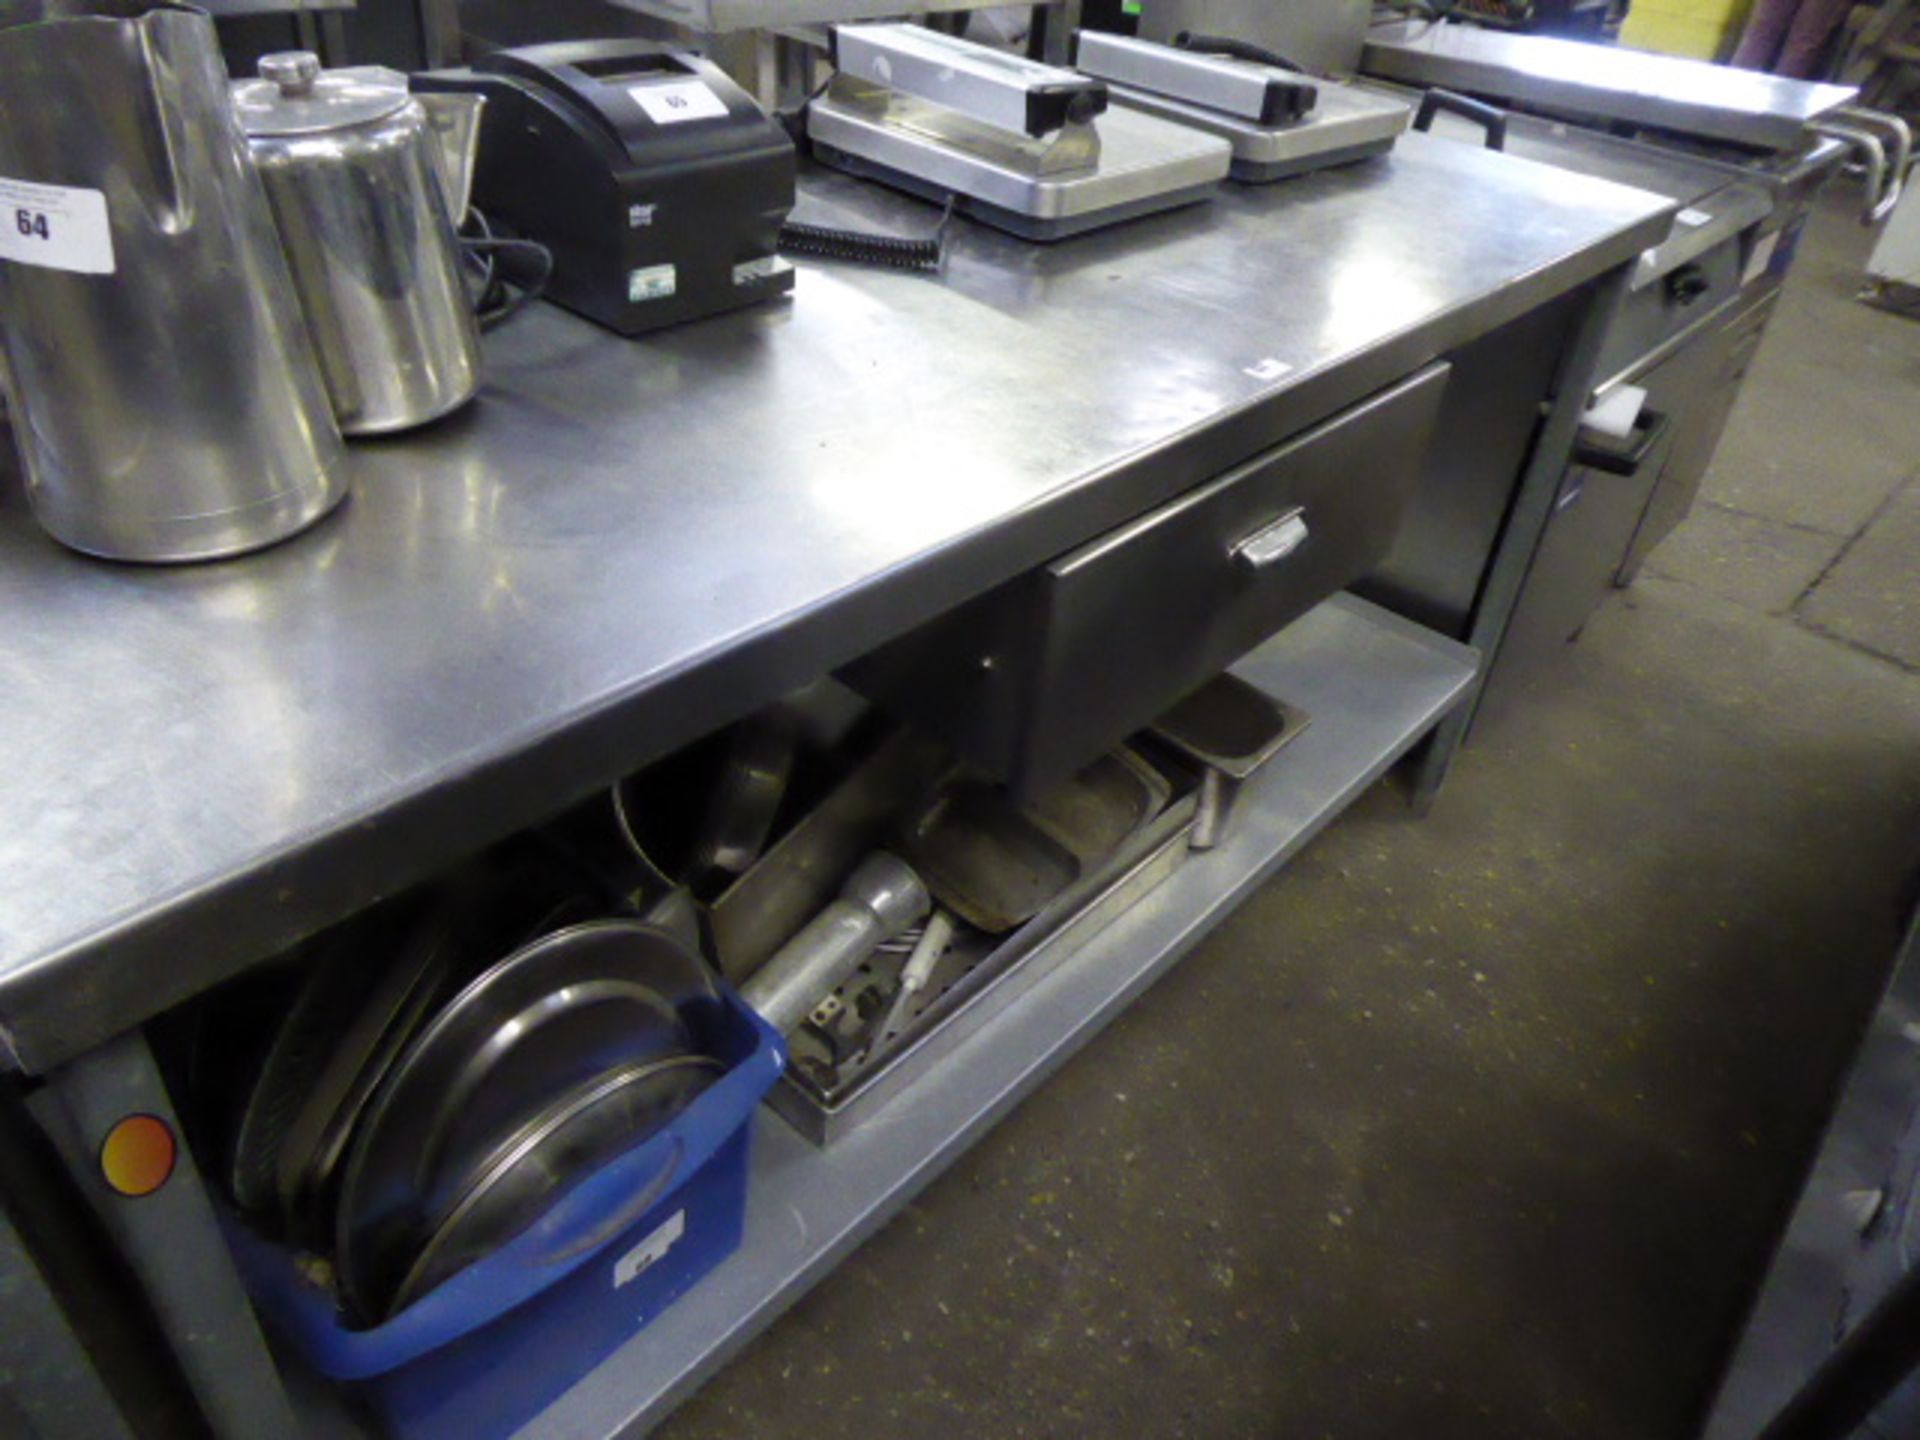 170cm stainless steel preparation table with drawer and shelf under - Image 2 of 2